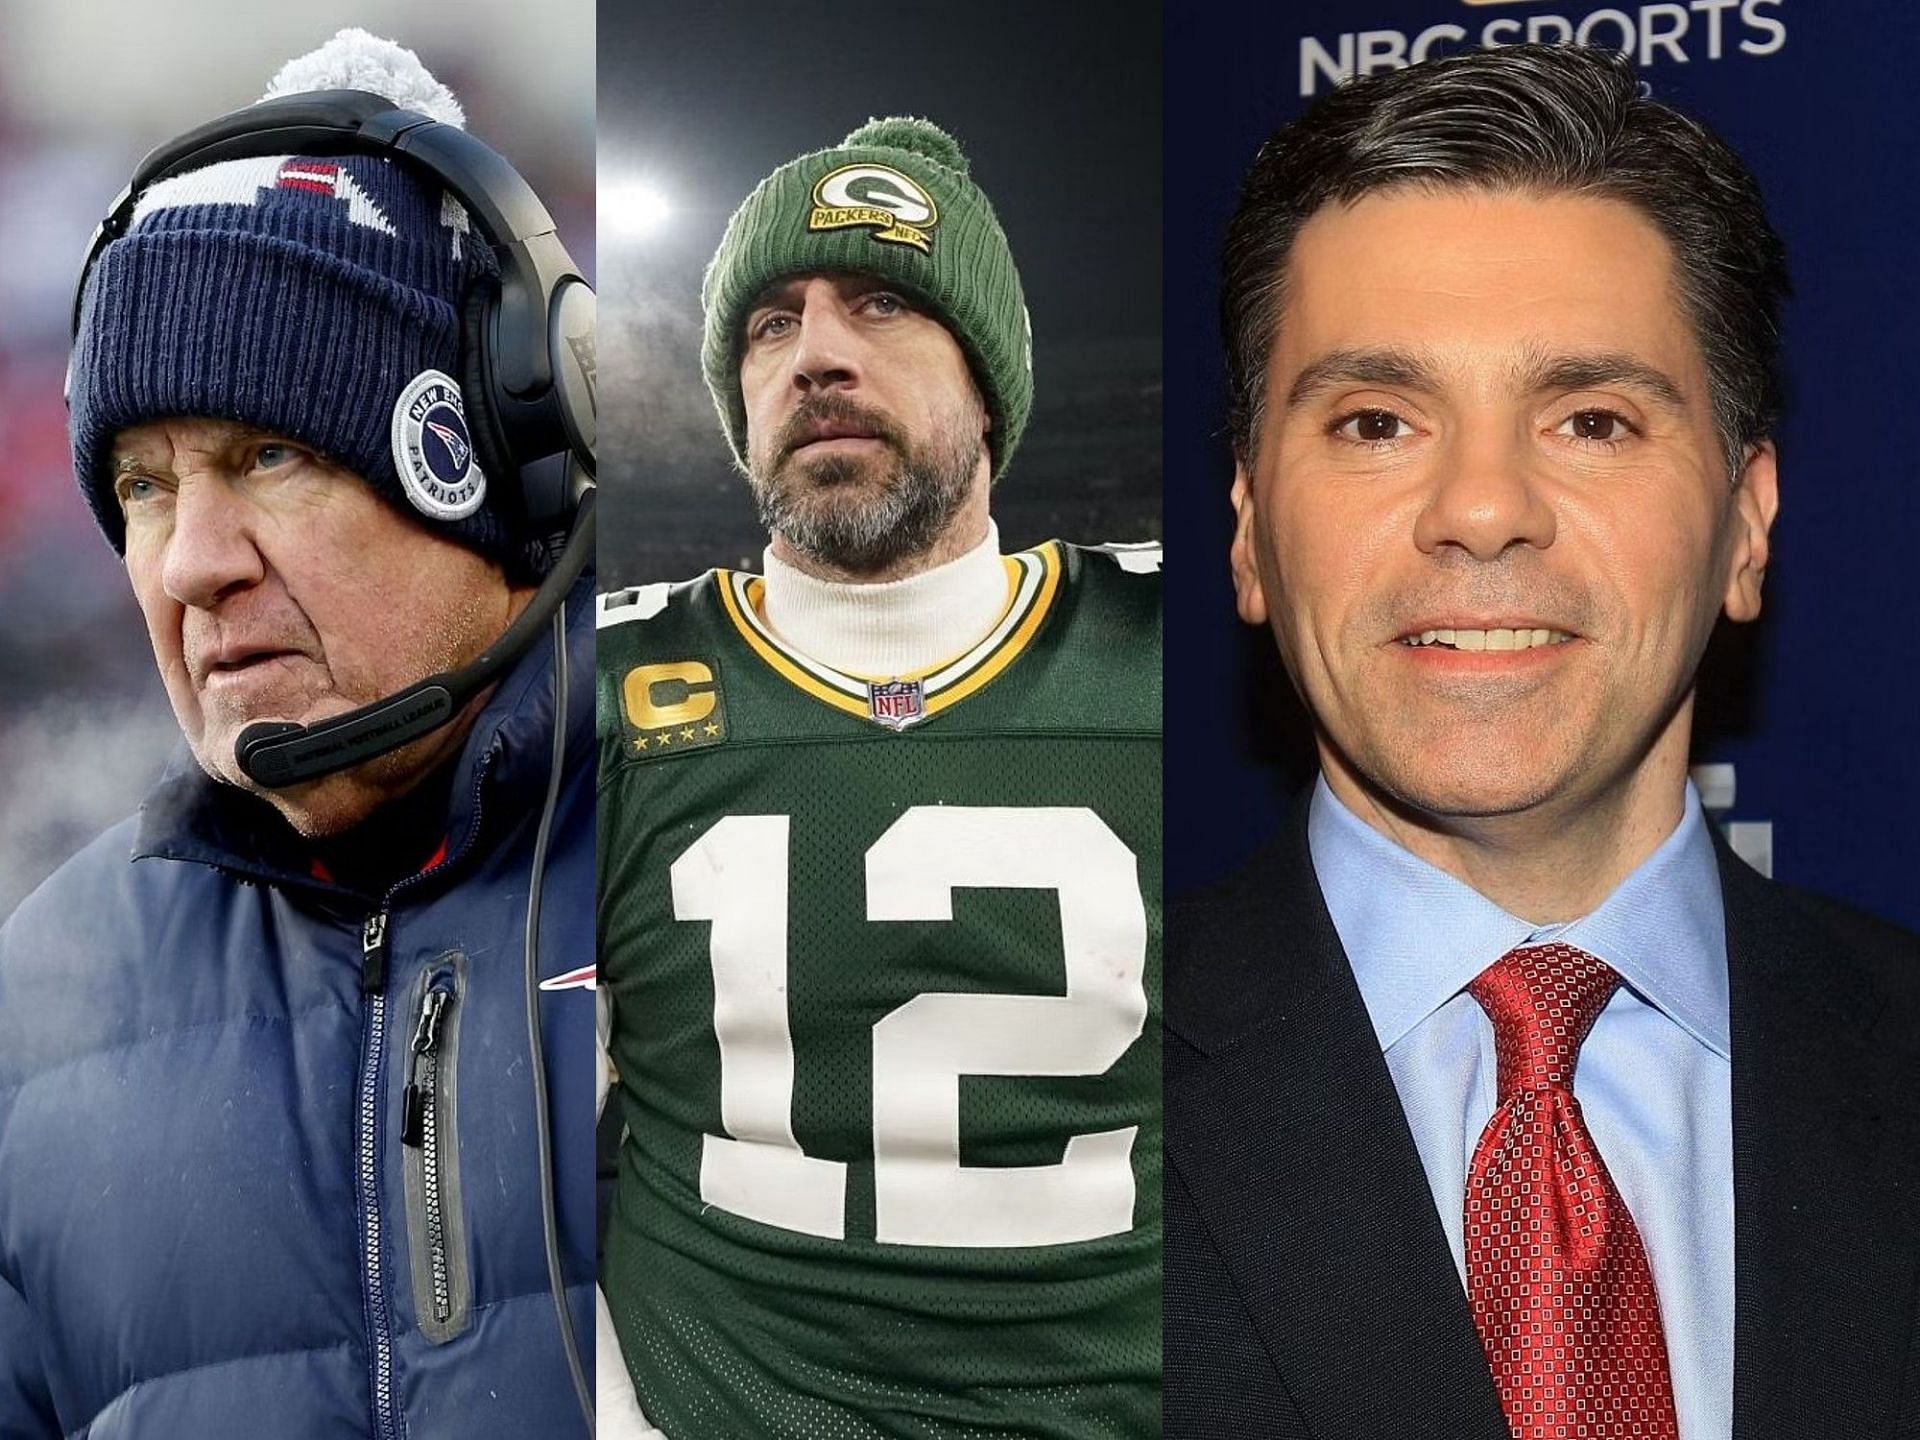 Aaron Rodgers could join Bill Belichick, claims Mike Florio